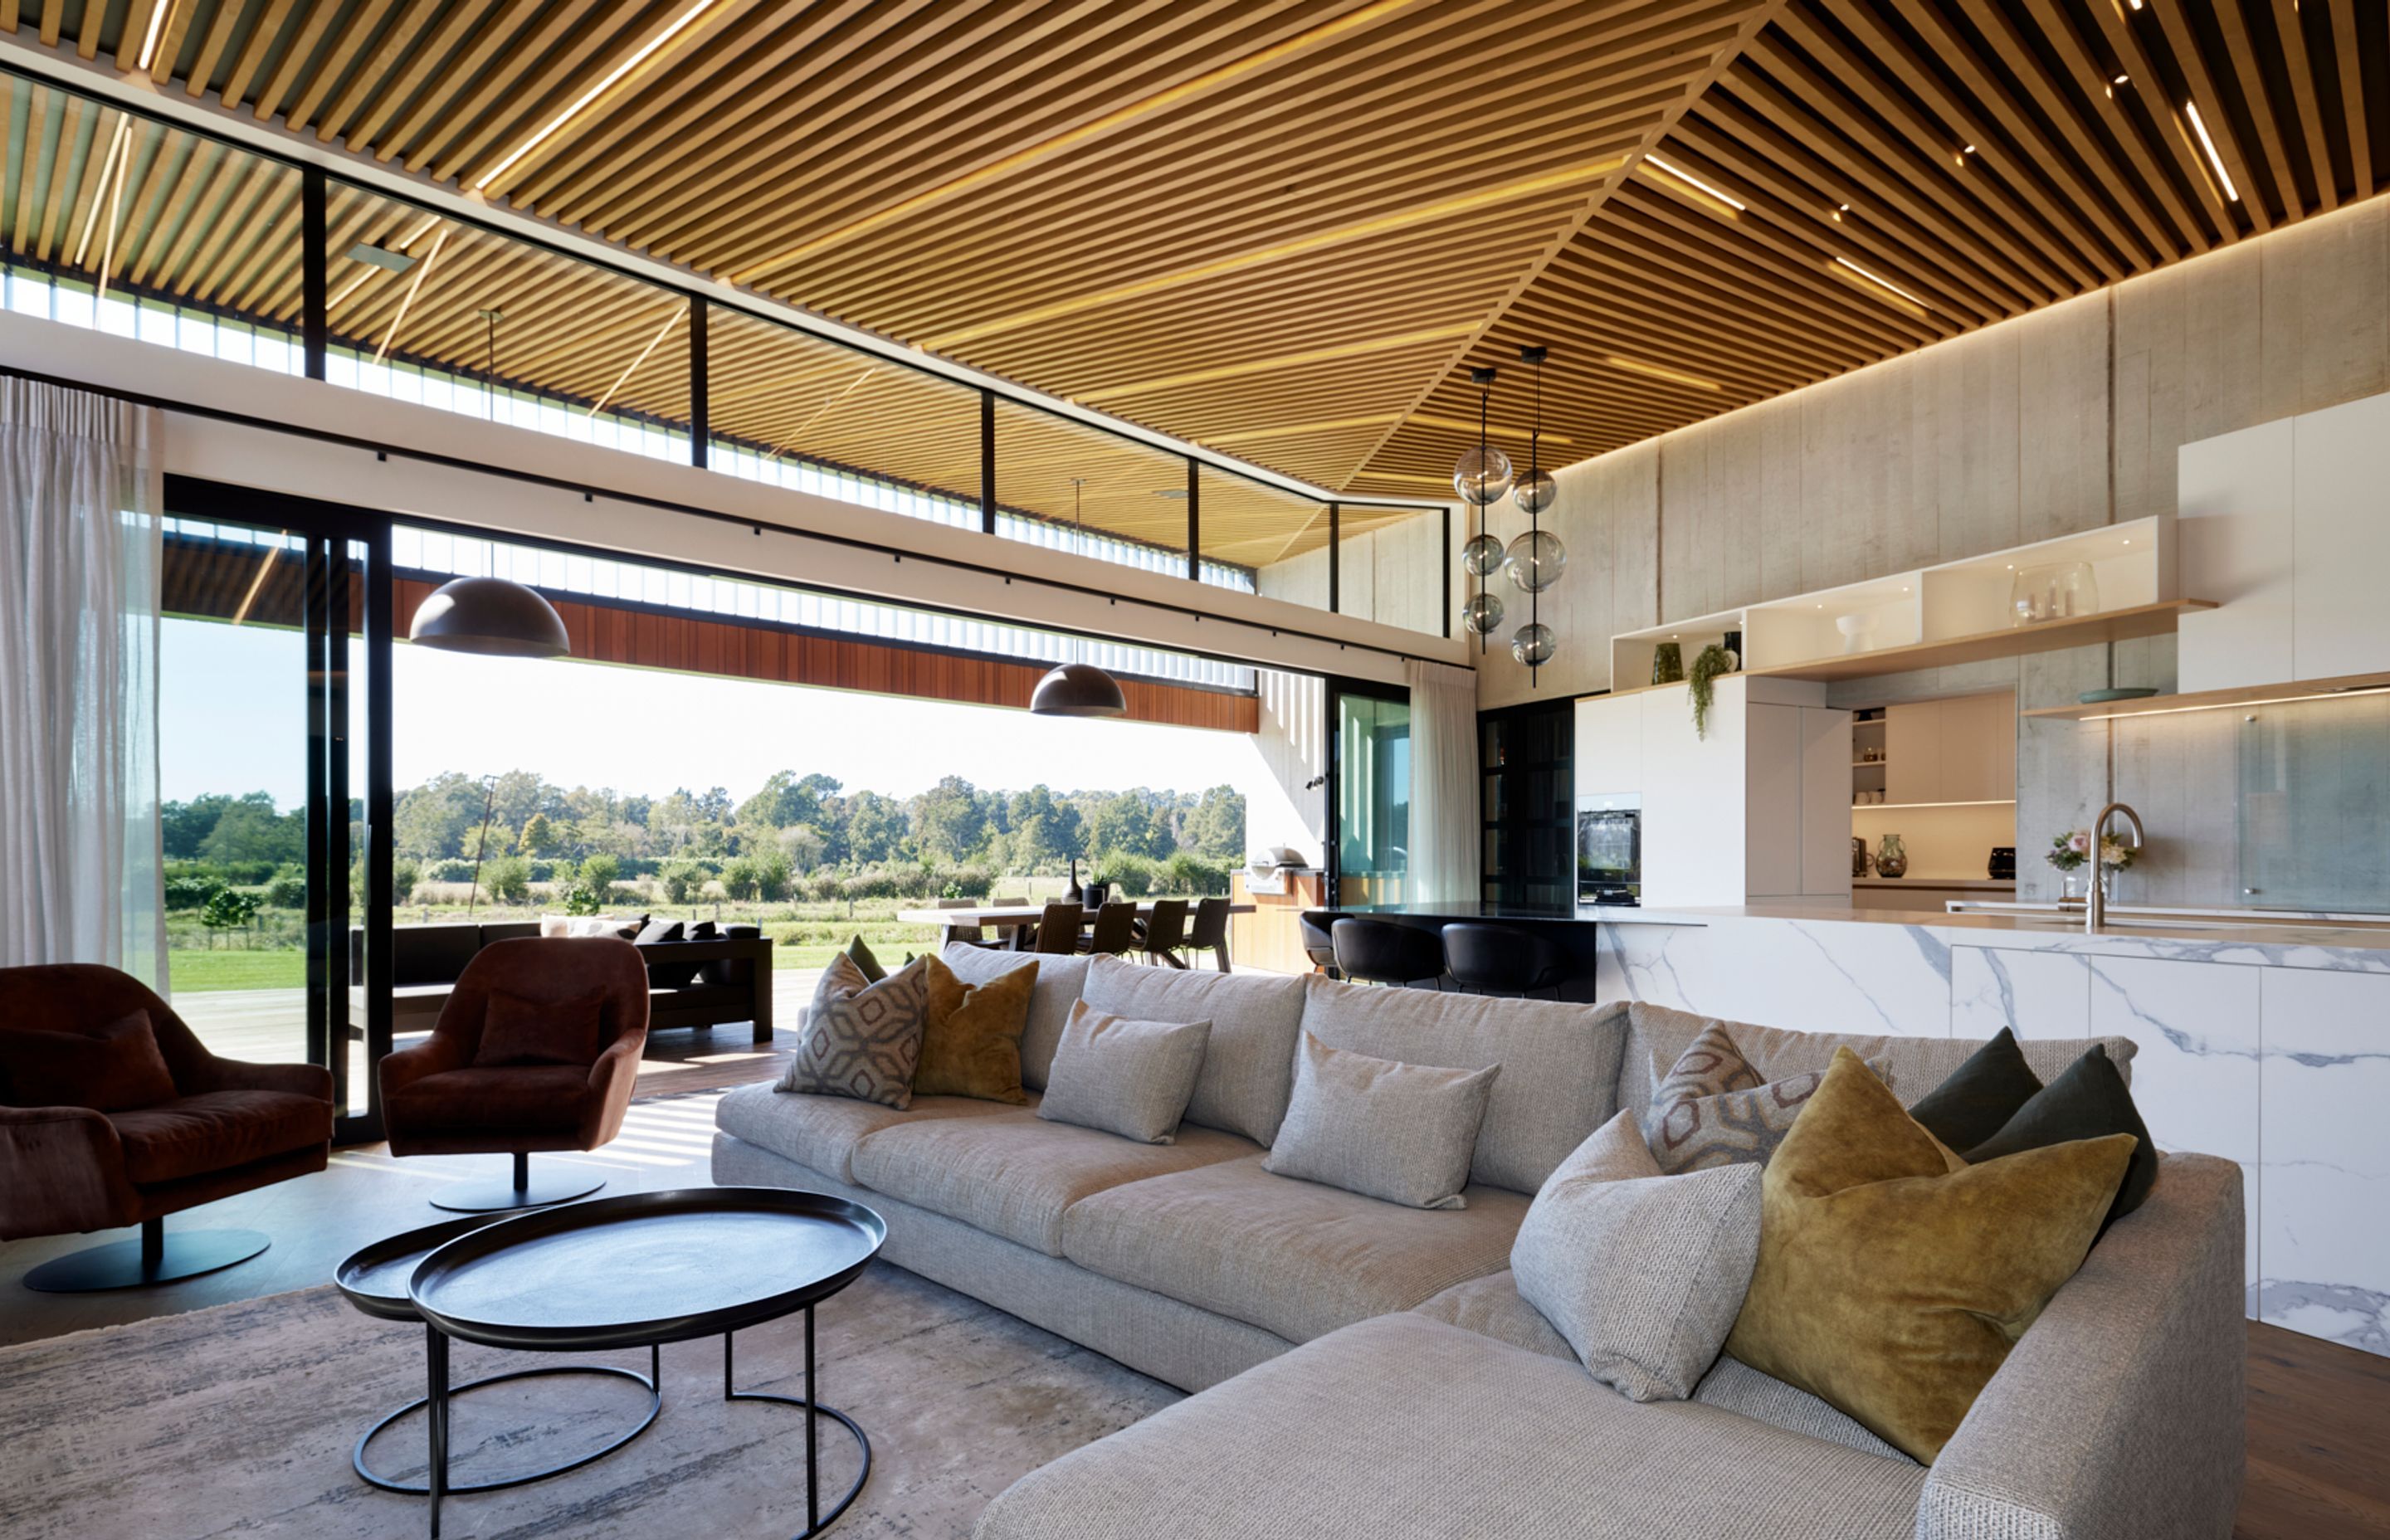 The cedar ceiling extends from inside to out.